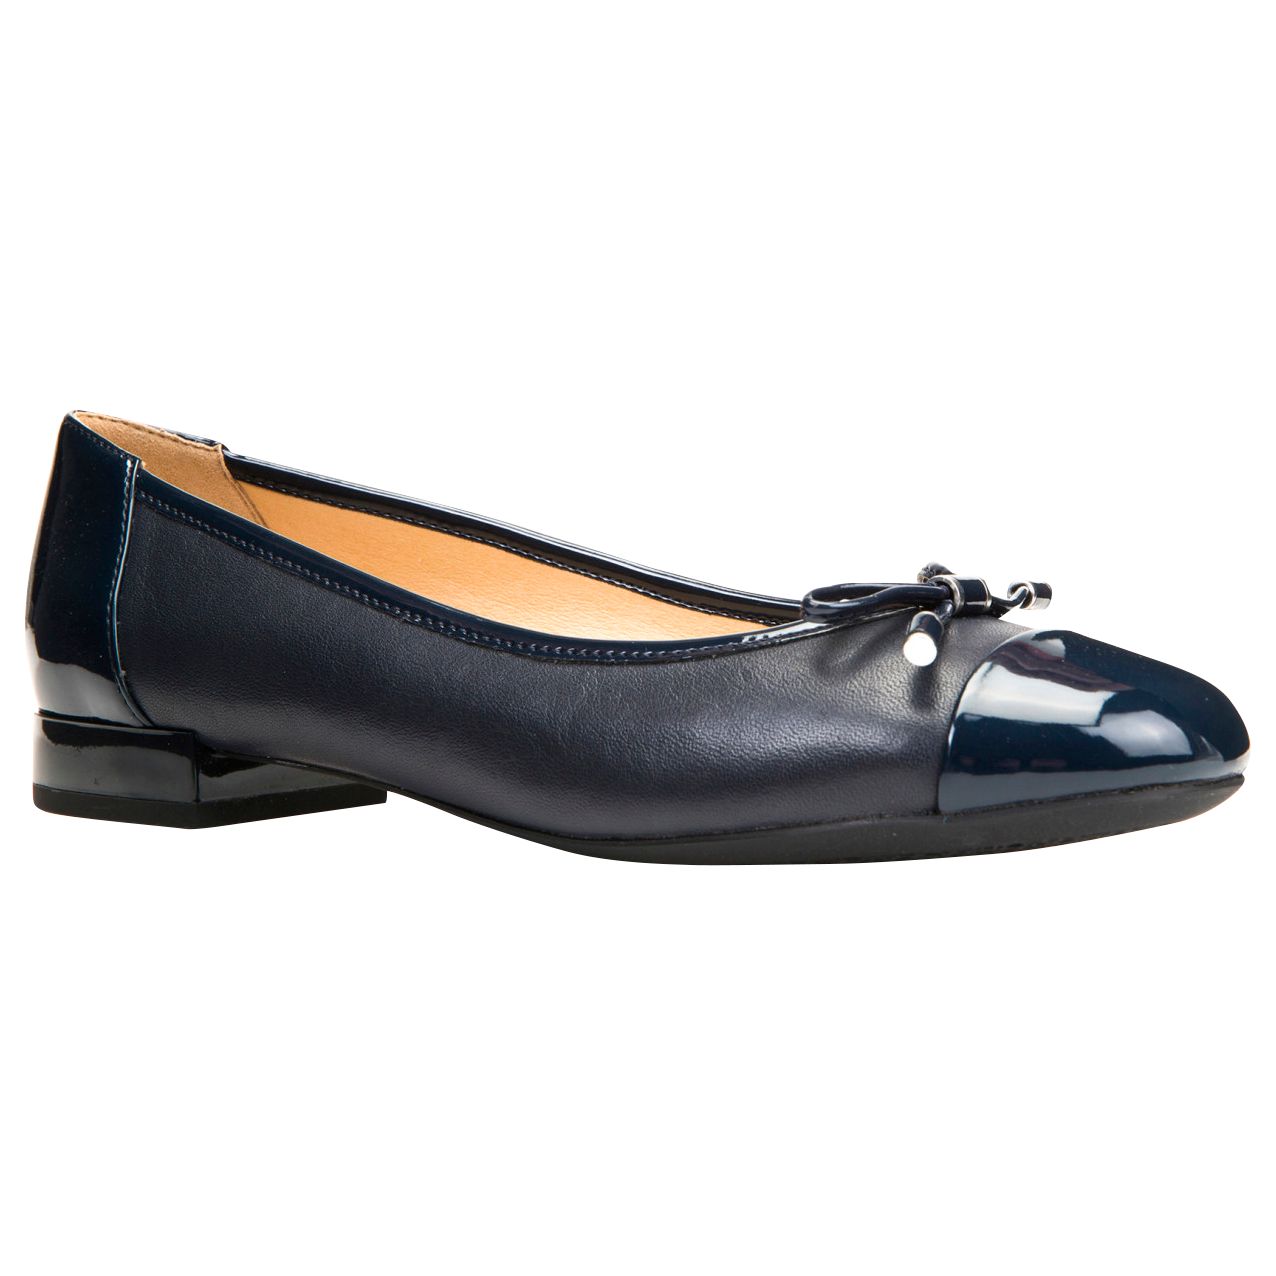 Geox Women's Wistrey Breathable Ballet Pumps, Navy Leather, 7